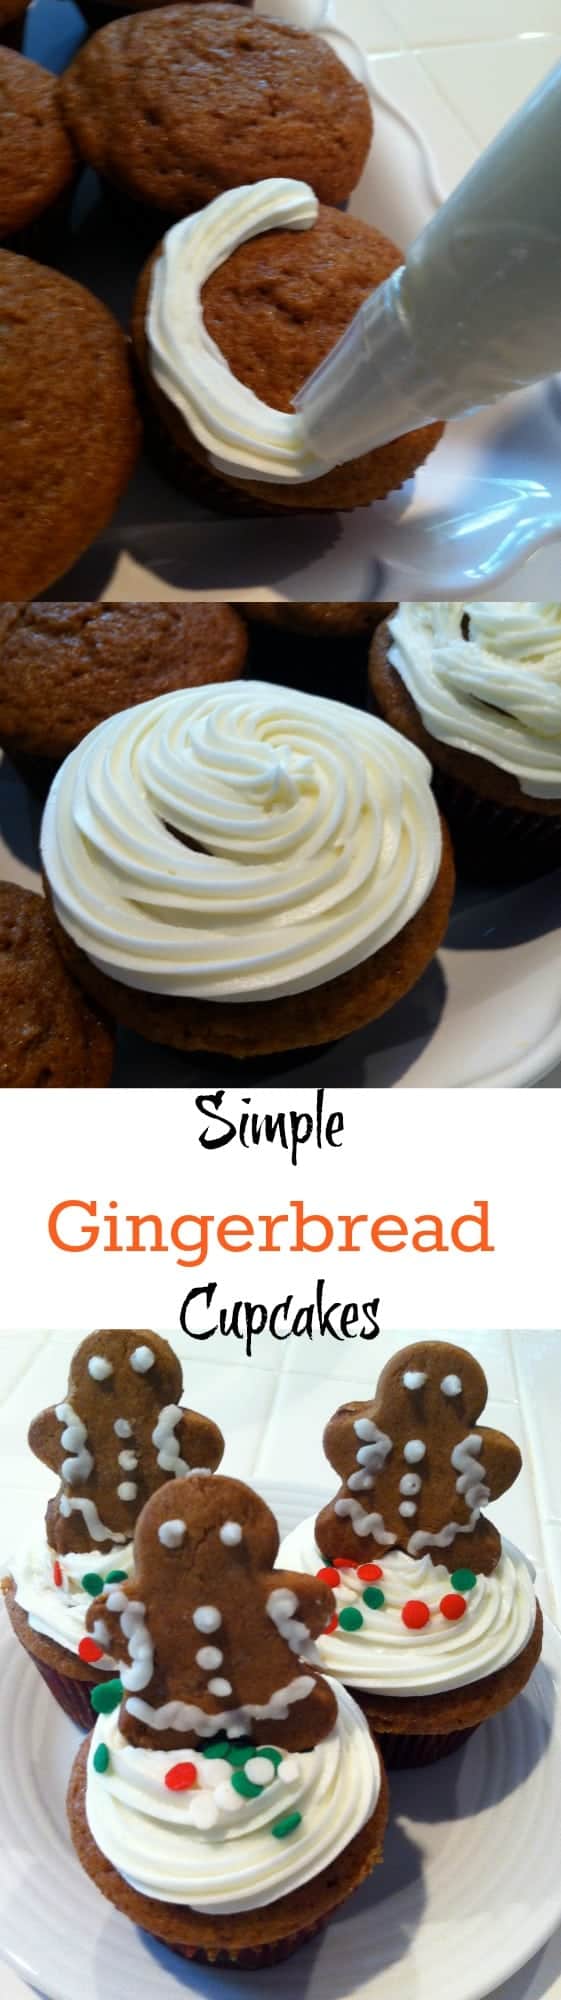 These simple gingerbread cupcakes are so easy to make with a boxed cake mix!